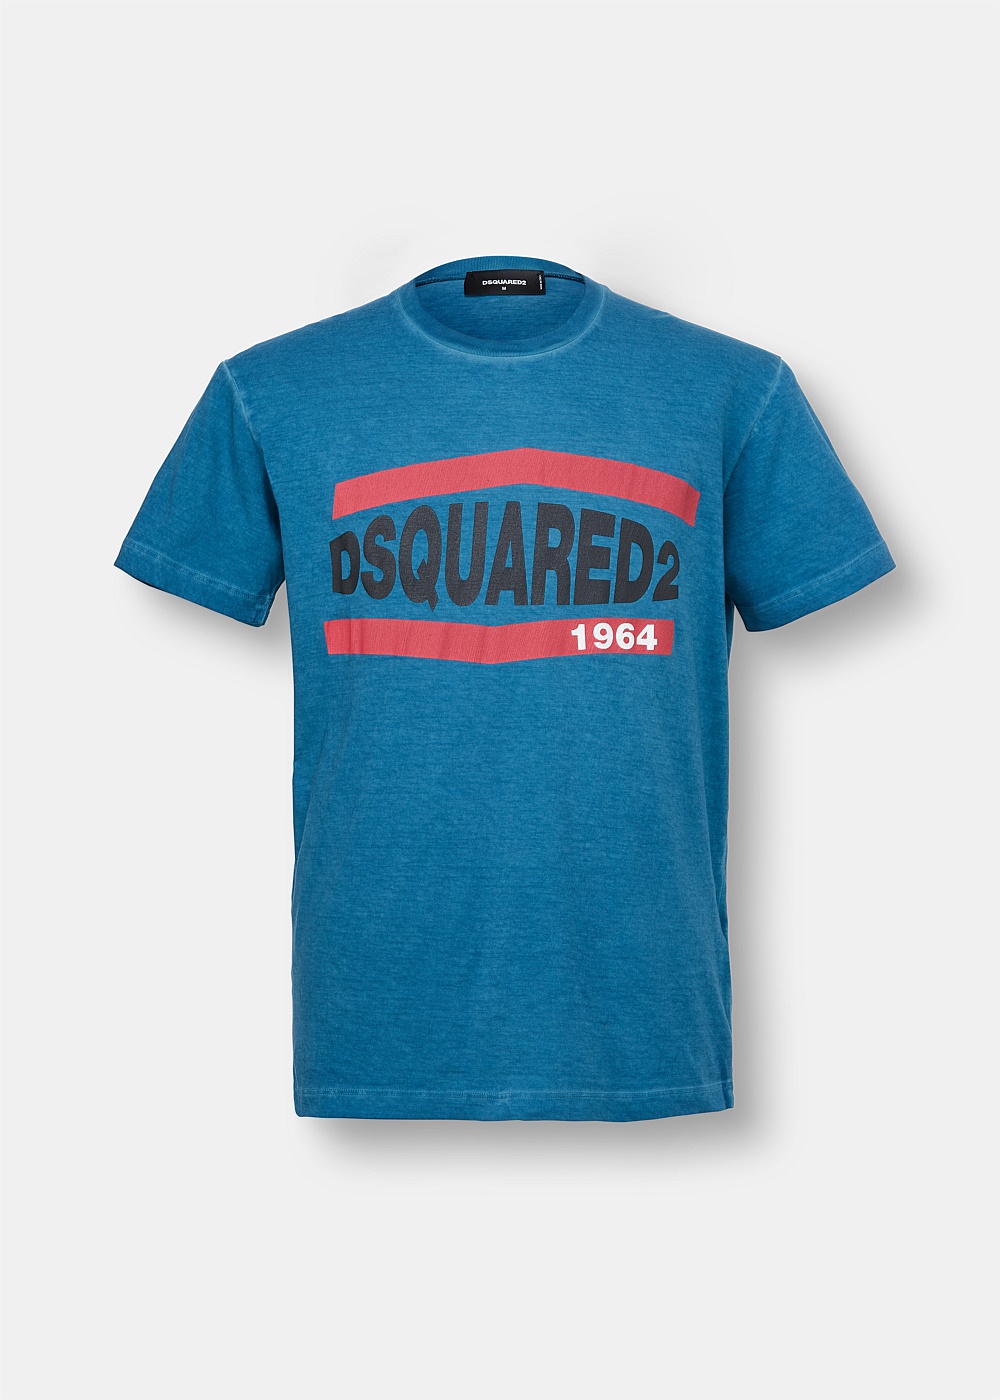 dsquared shirt afterpay